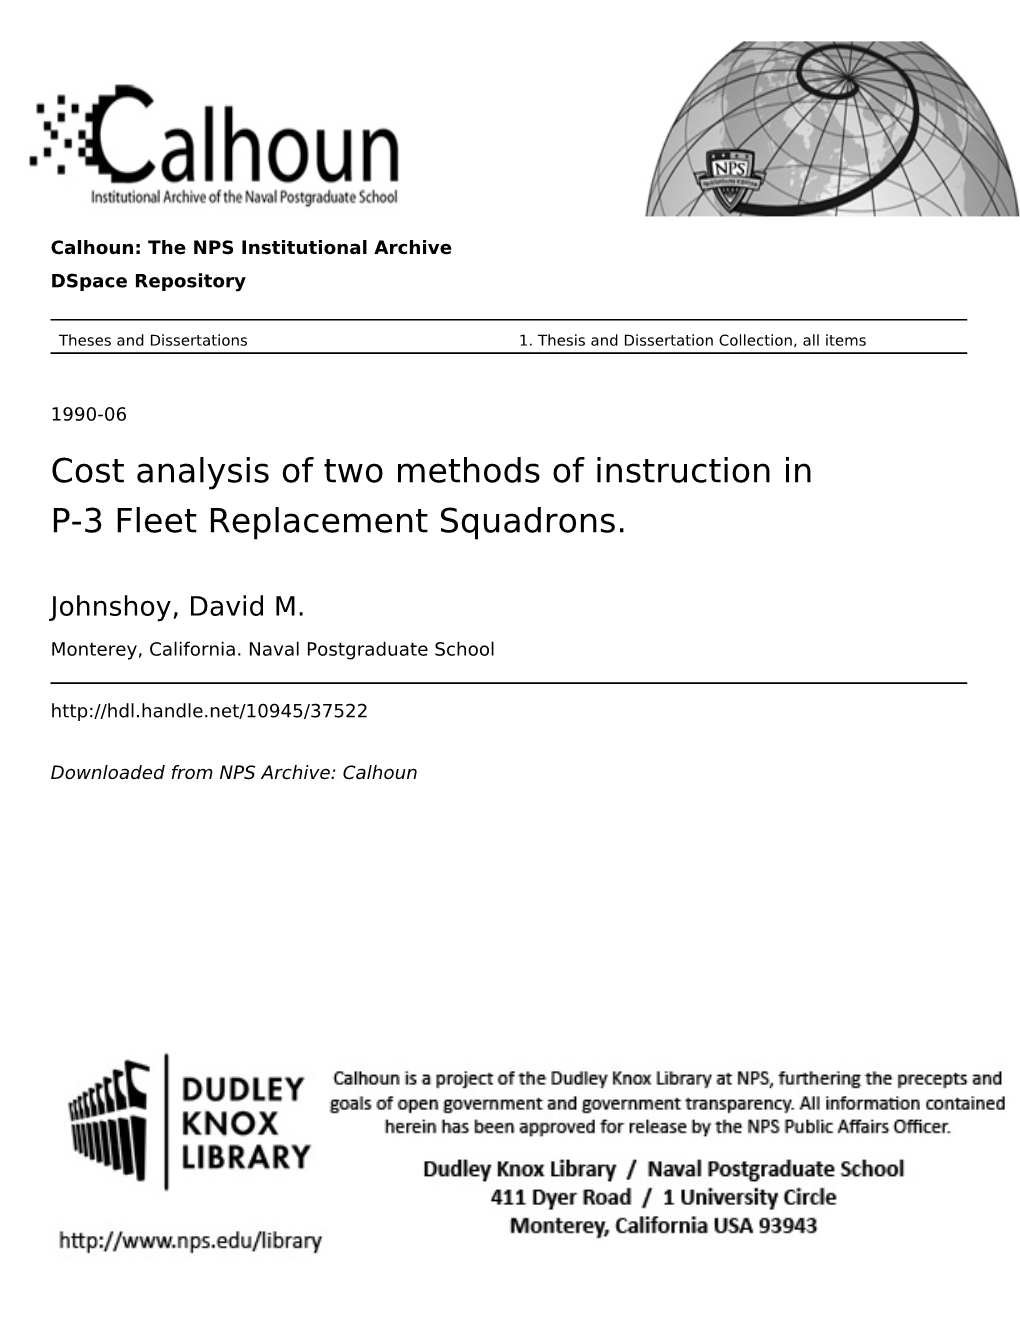 Cost Analysis of Two Methods of Instruction in P-3 Fleet Replacement Squadrons